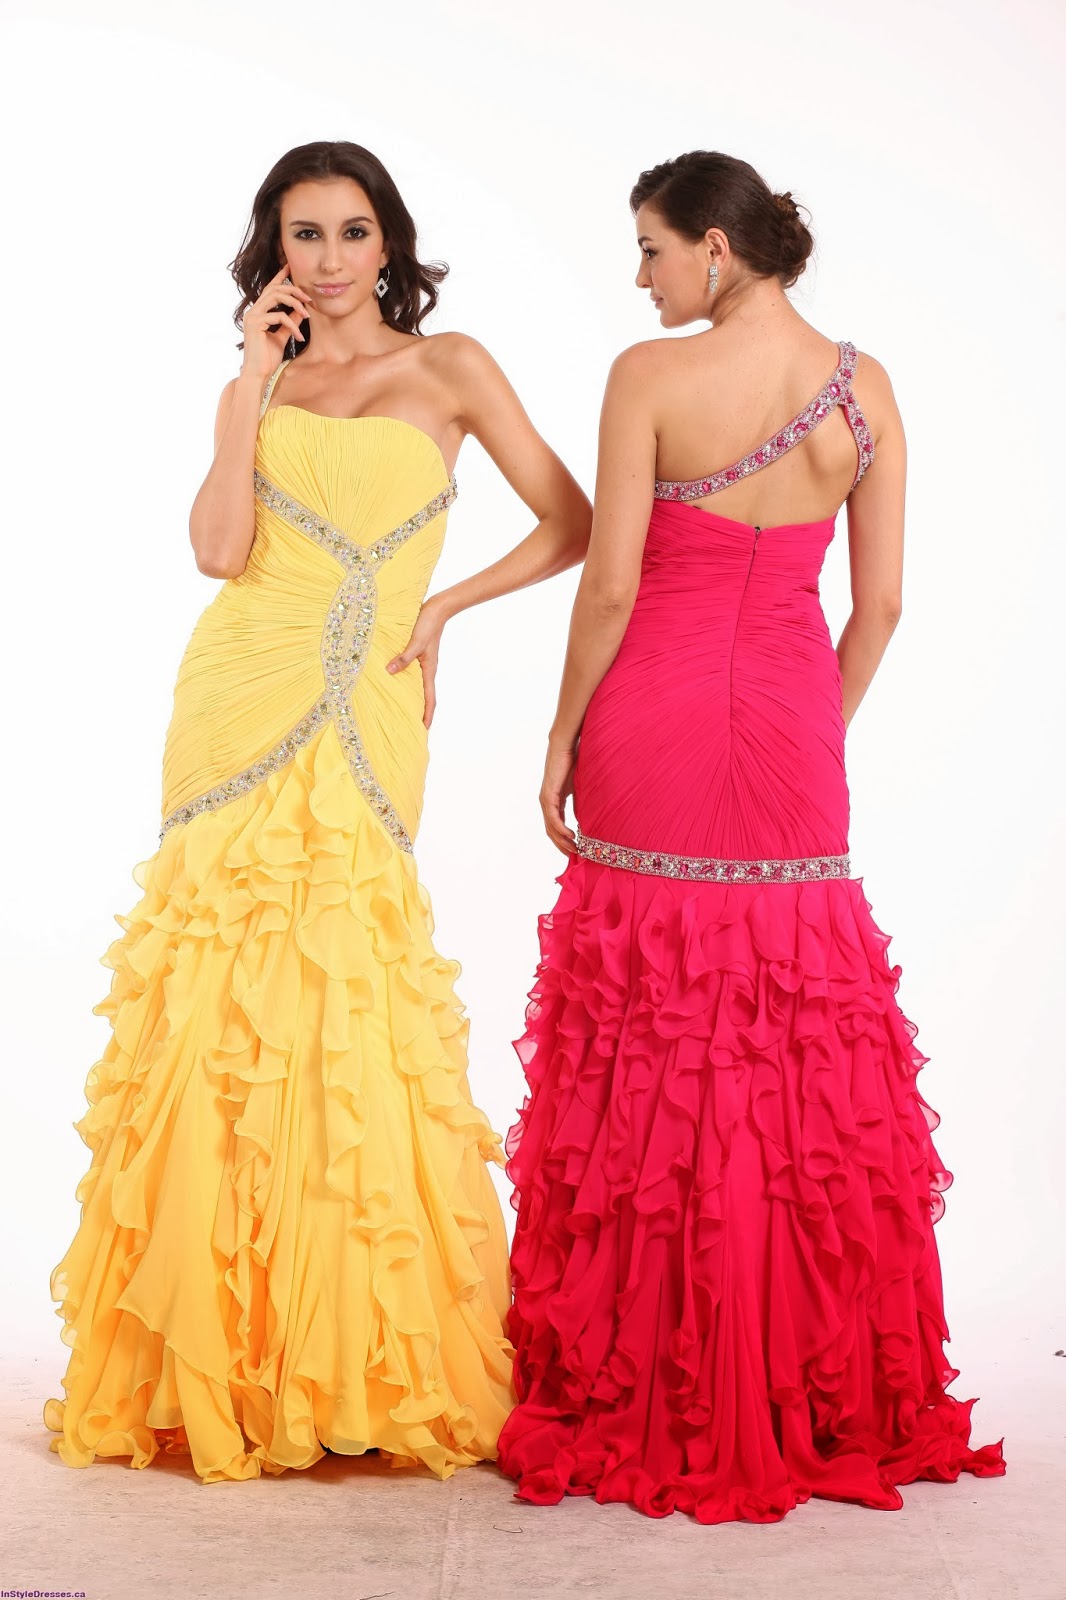 Blog for Dress Shopping: Luxury Ruffled Prom Dresses For The New Year'd ...